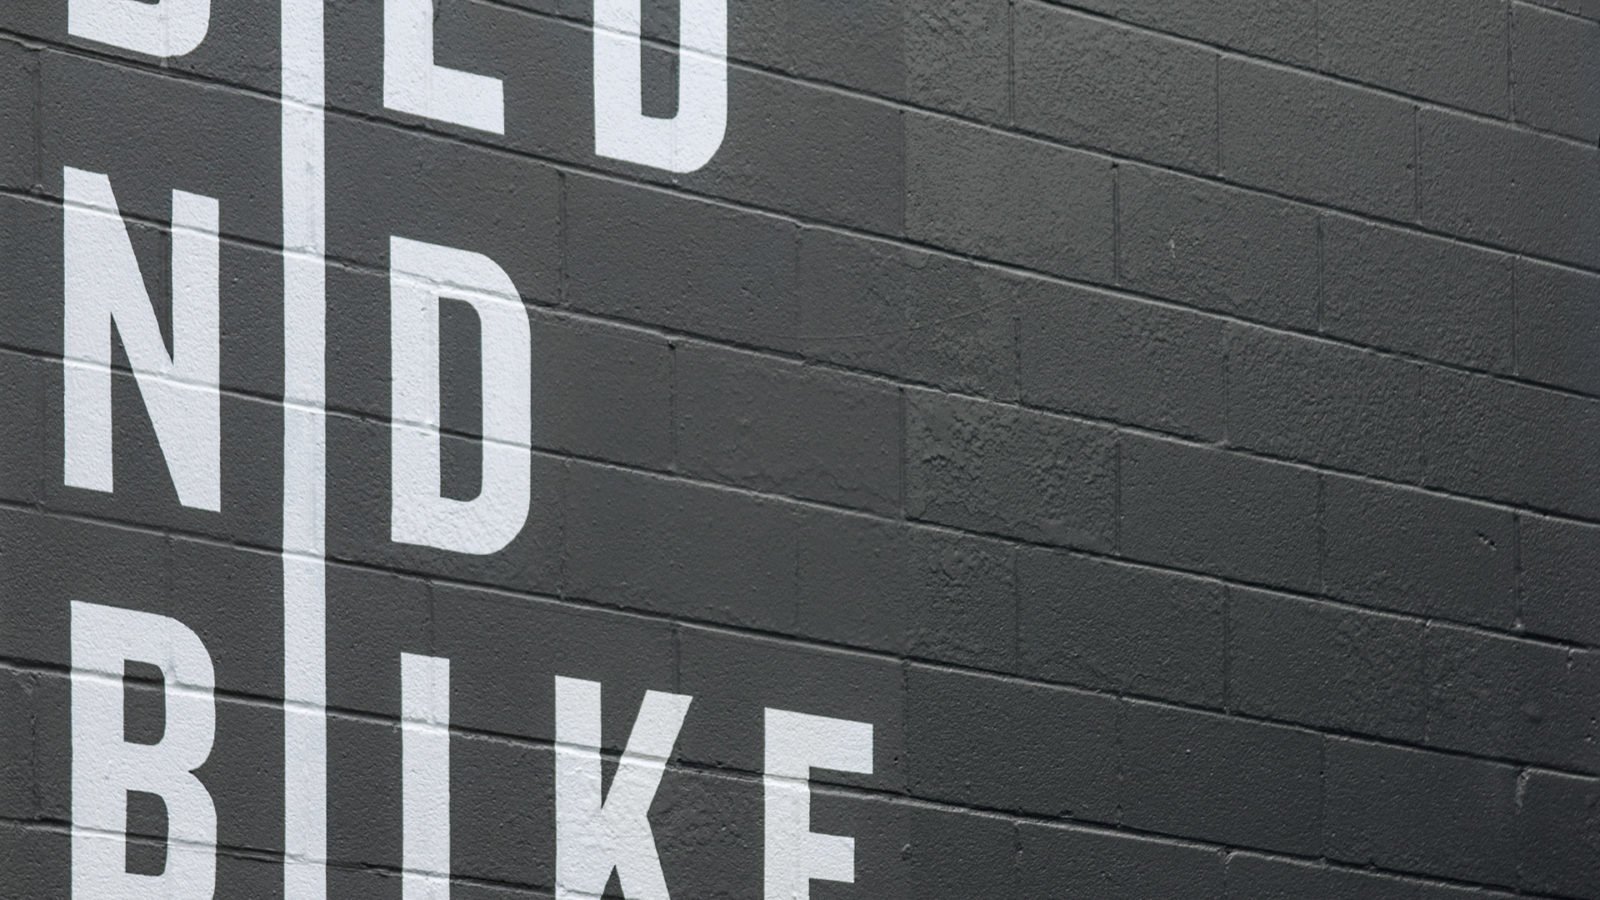 Mural for Boutique Hotel Branding for Bed and Bike